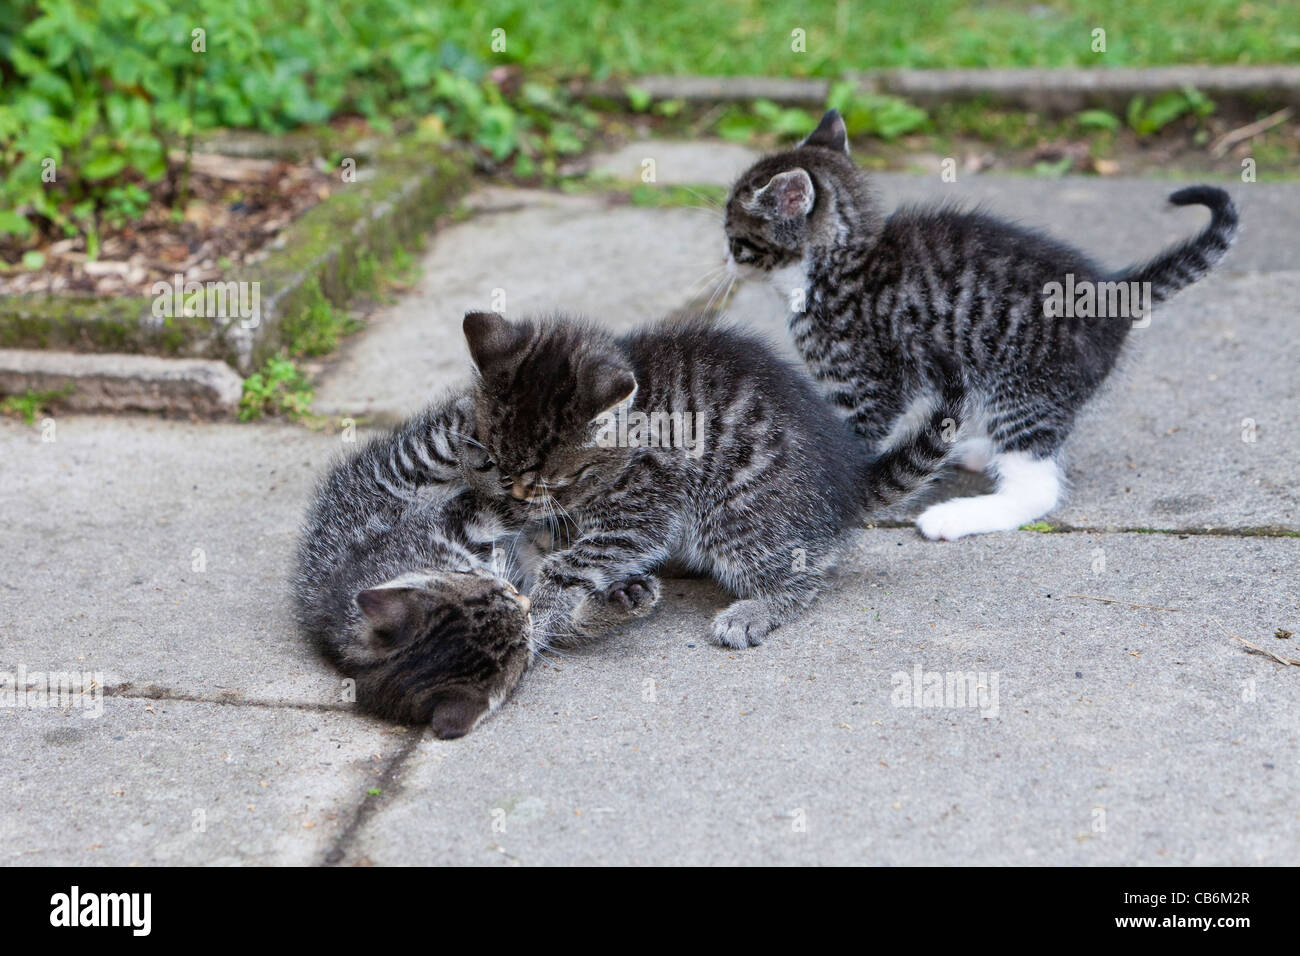 Kittens, three playing outdoors in garden, Lower Saxony, Germany Stock Photo